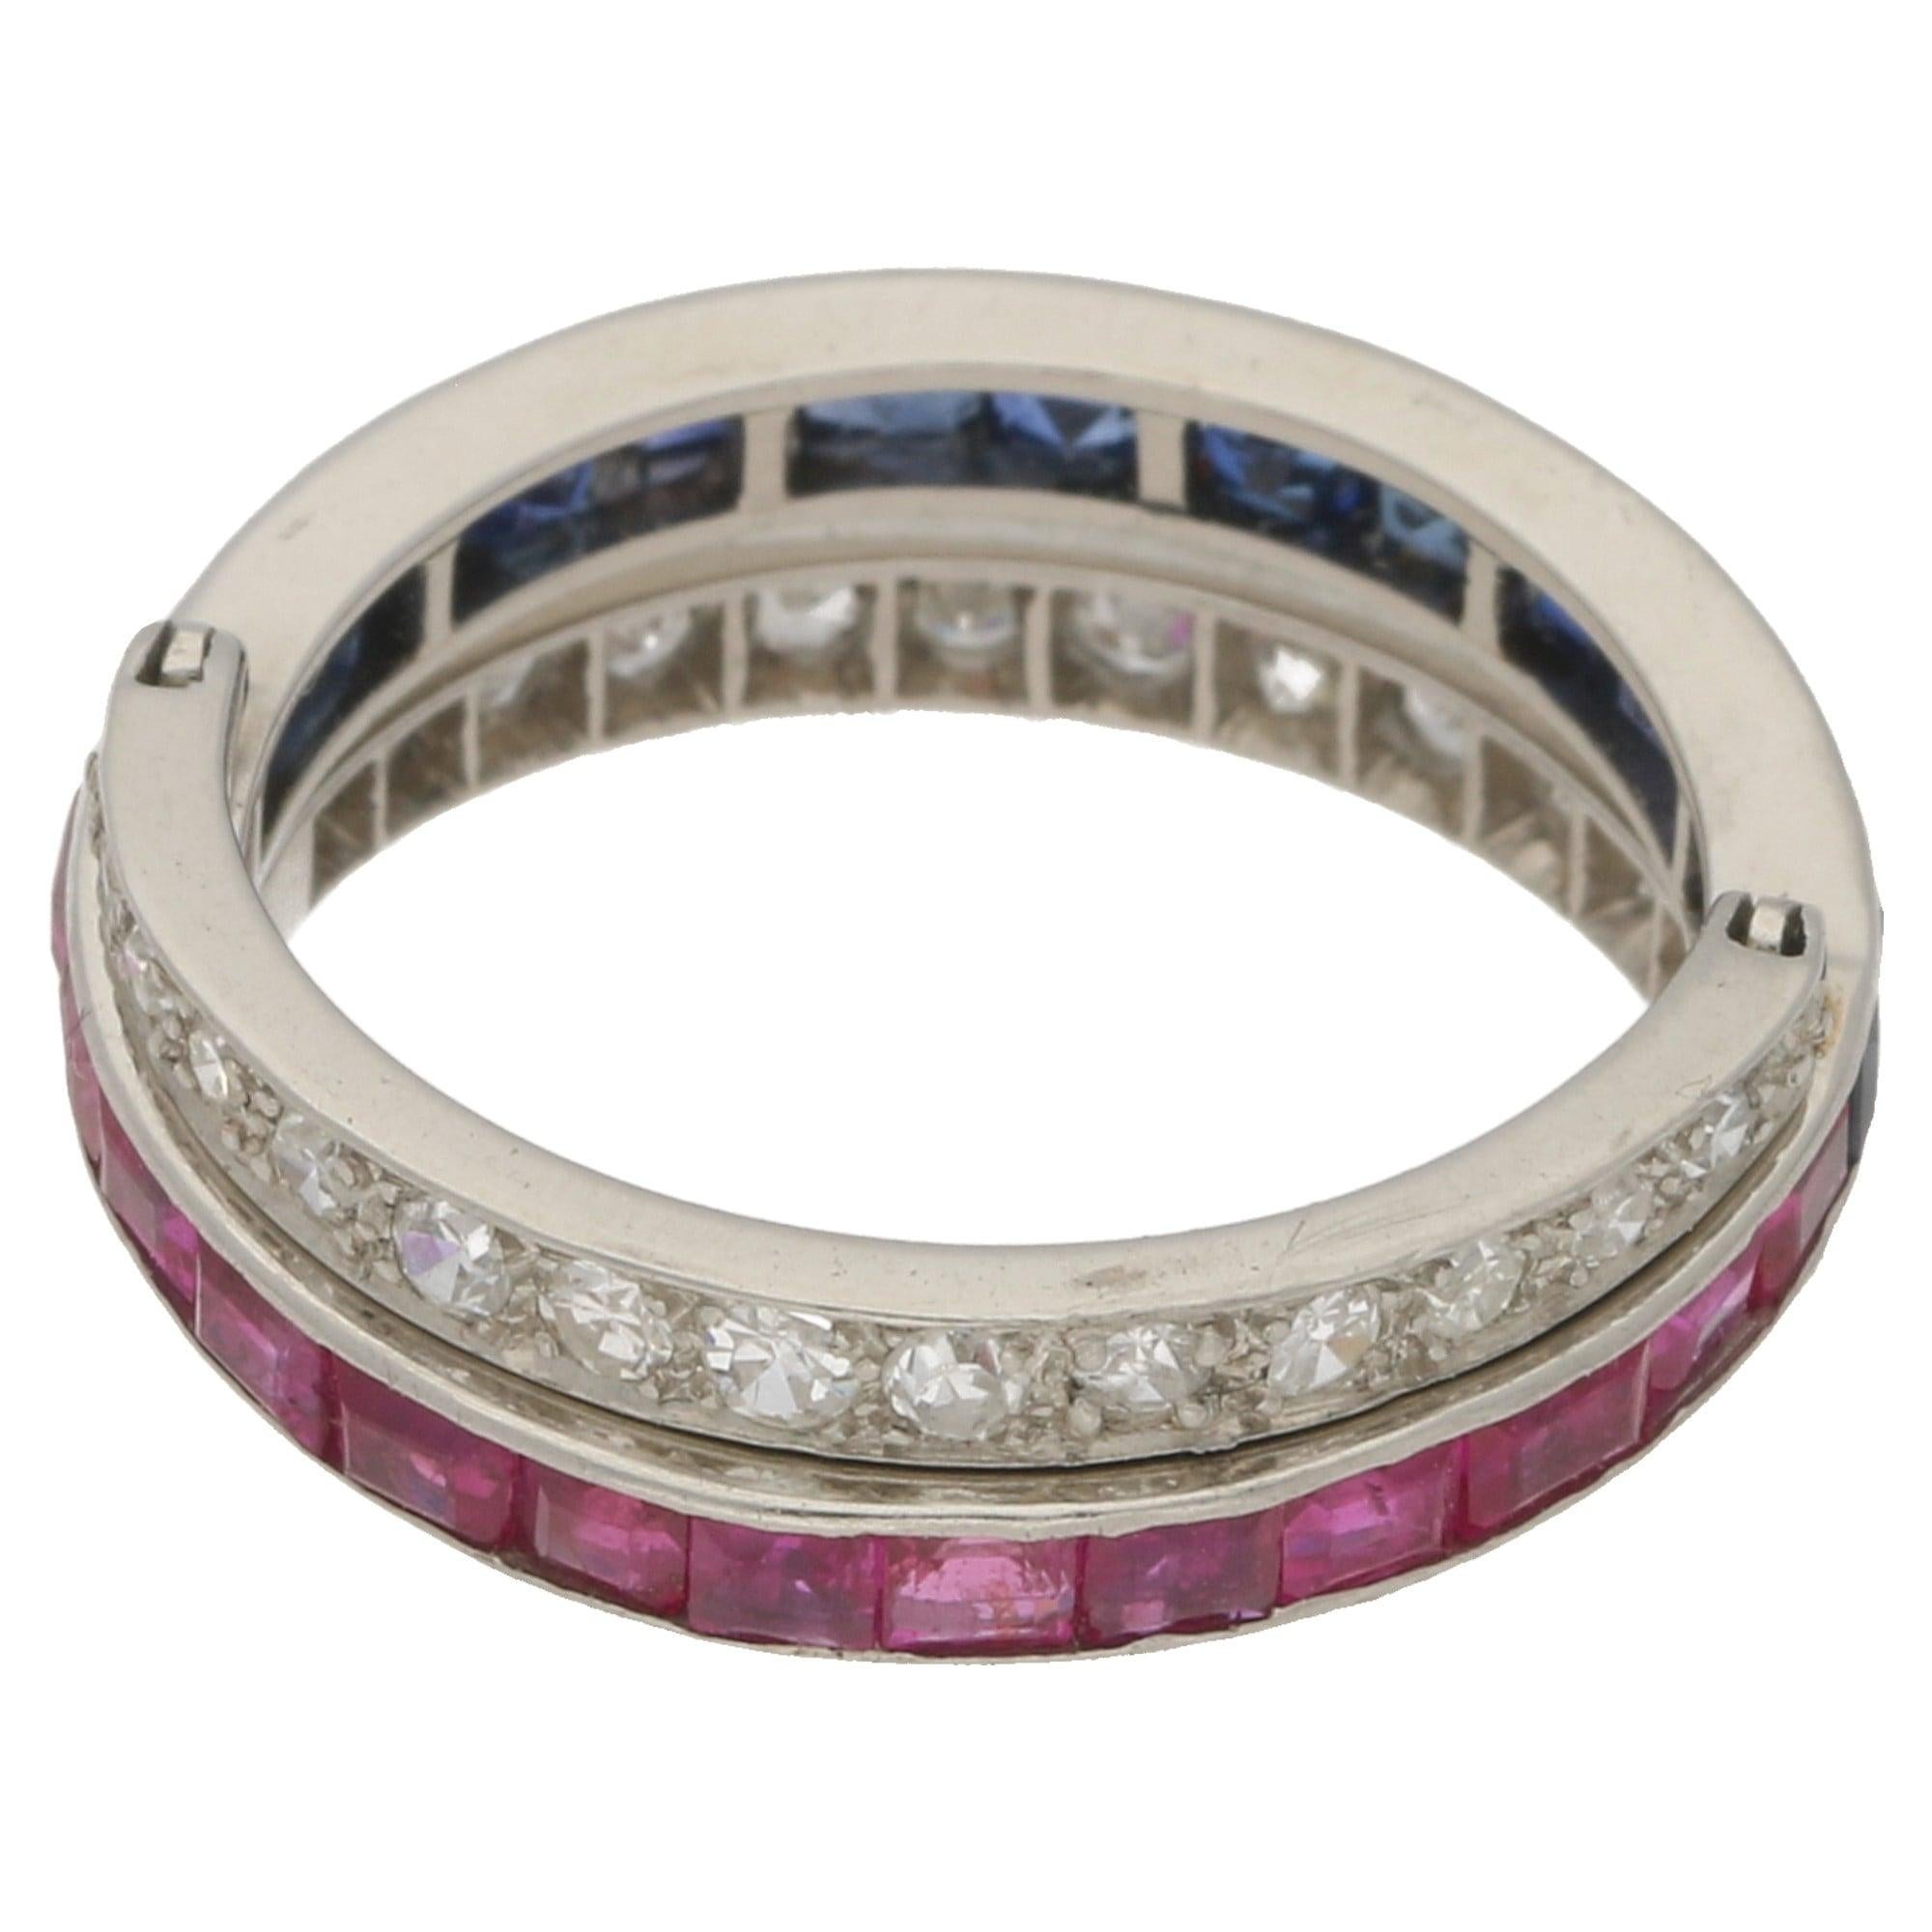 An early 1930’s sapphire, ruby and diamond convertible flip ring set in platinum. 

This piece is an excellent example of the Art Deco style, period and craftsmanship. Firstly the band is invisibly set with red-pinkish rubies and royal blue